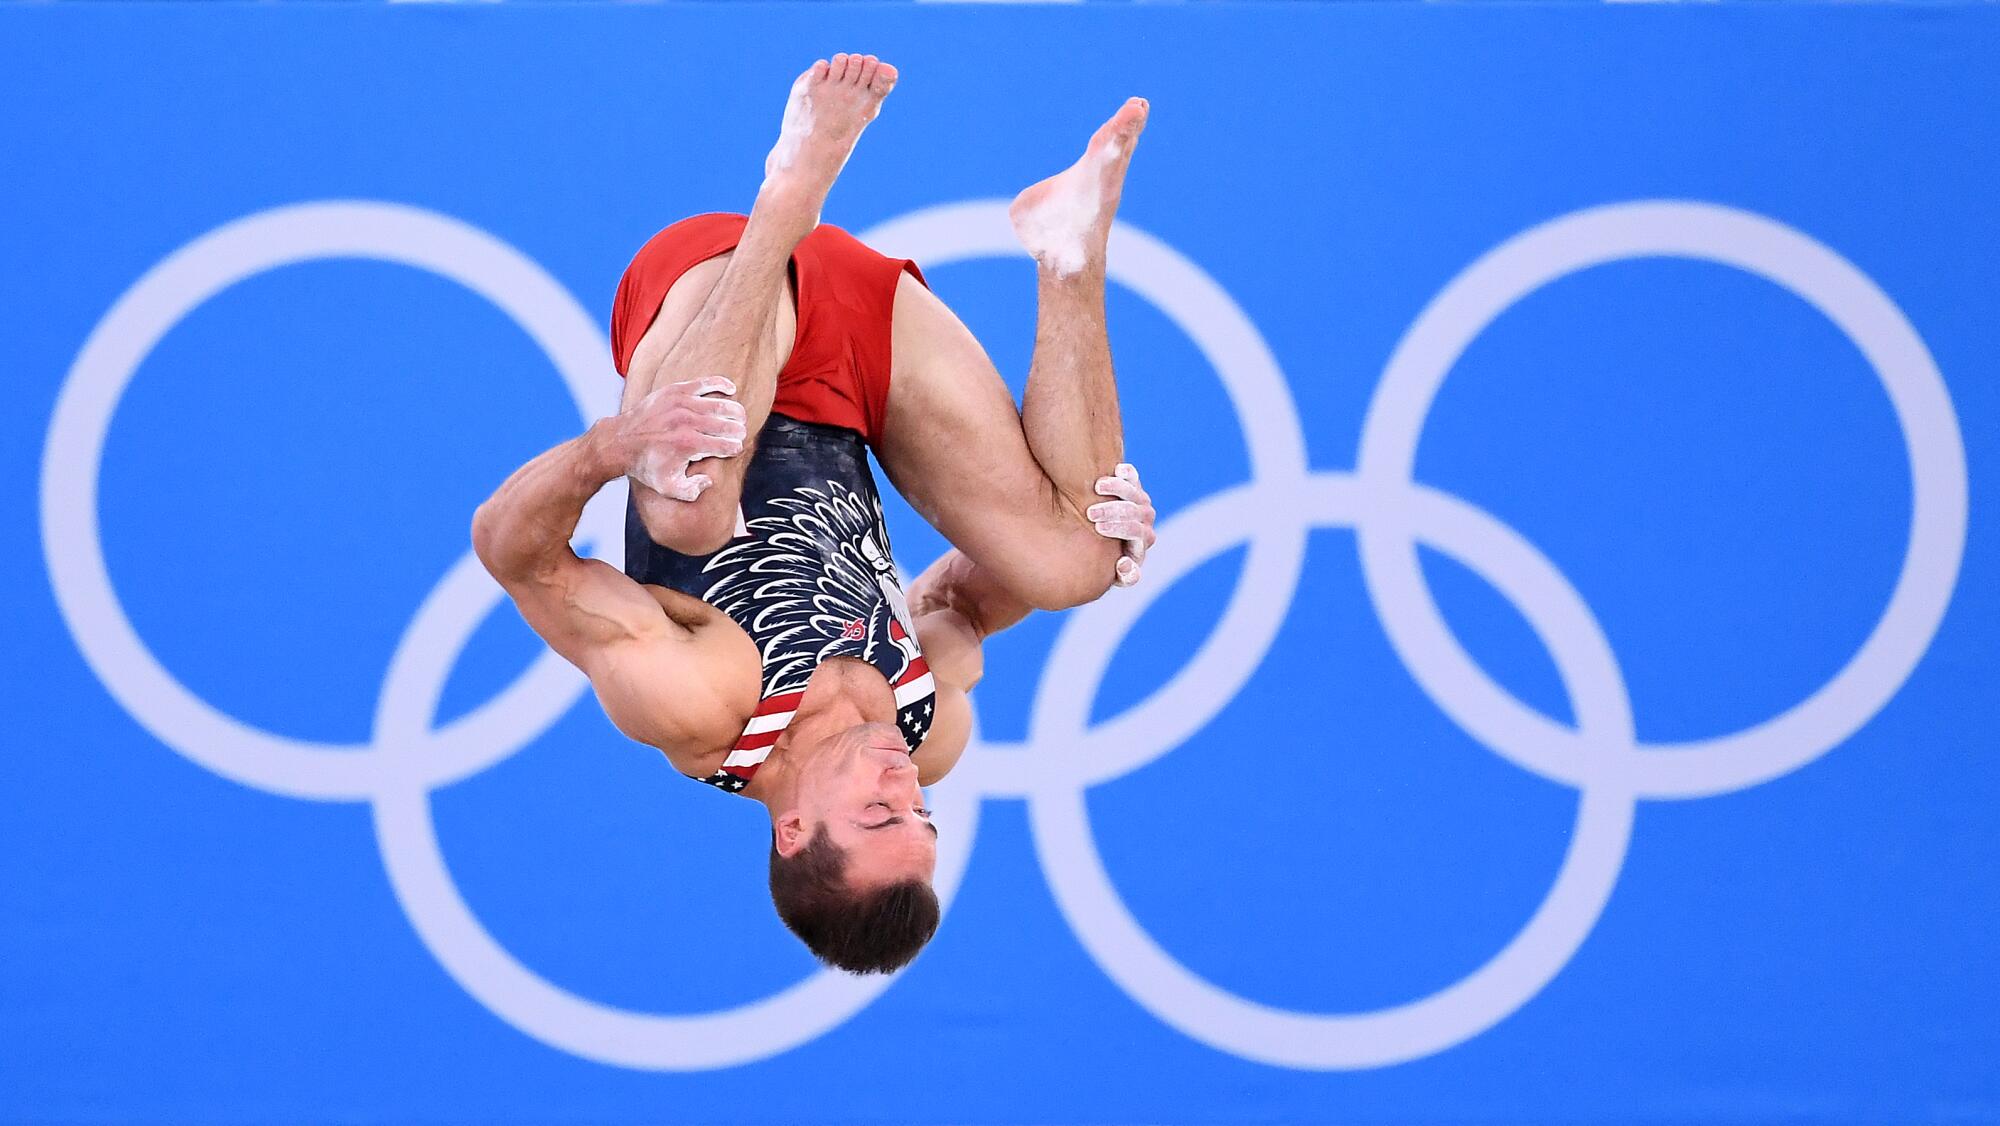 Samuel Mikulak is upside down, grasping both knees, with the Olympic rings in the background.